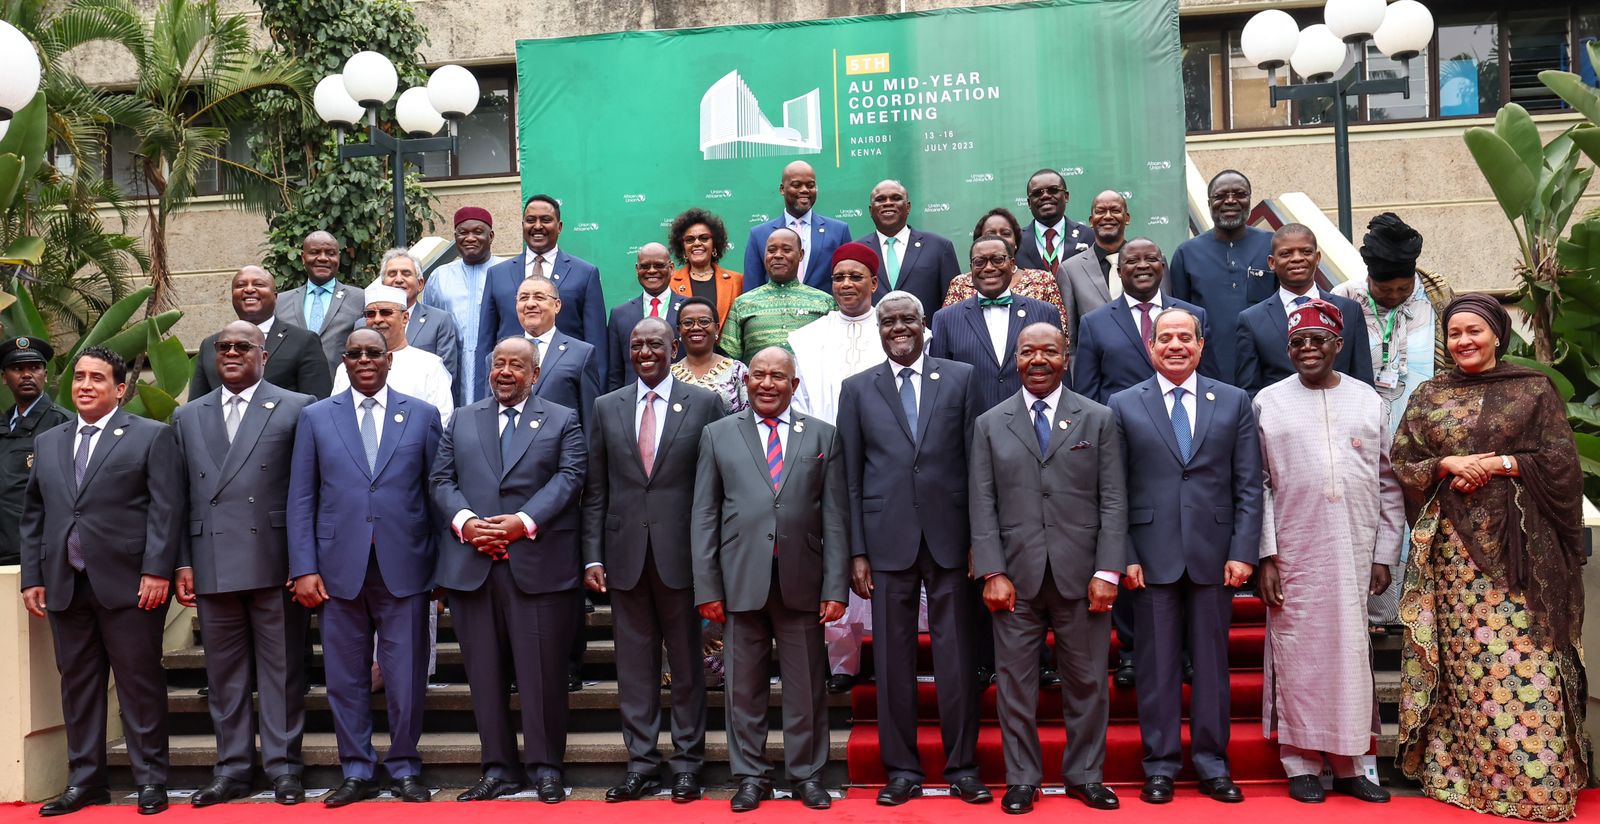 Calls for Self-Reliance Dominate African Union High-Level Summit in Nairobi 